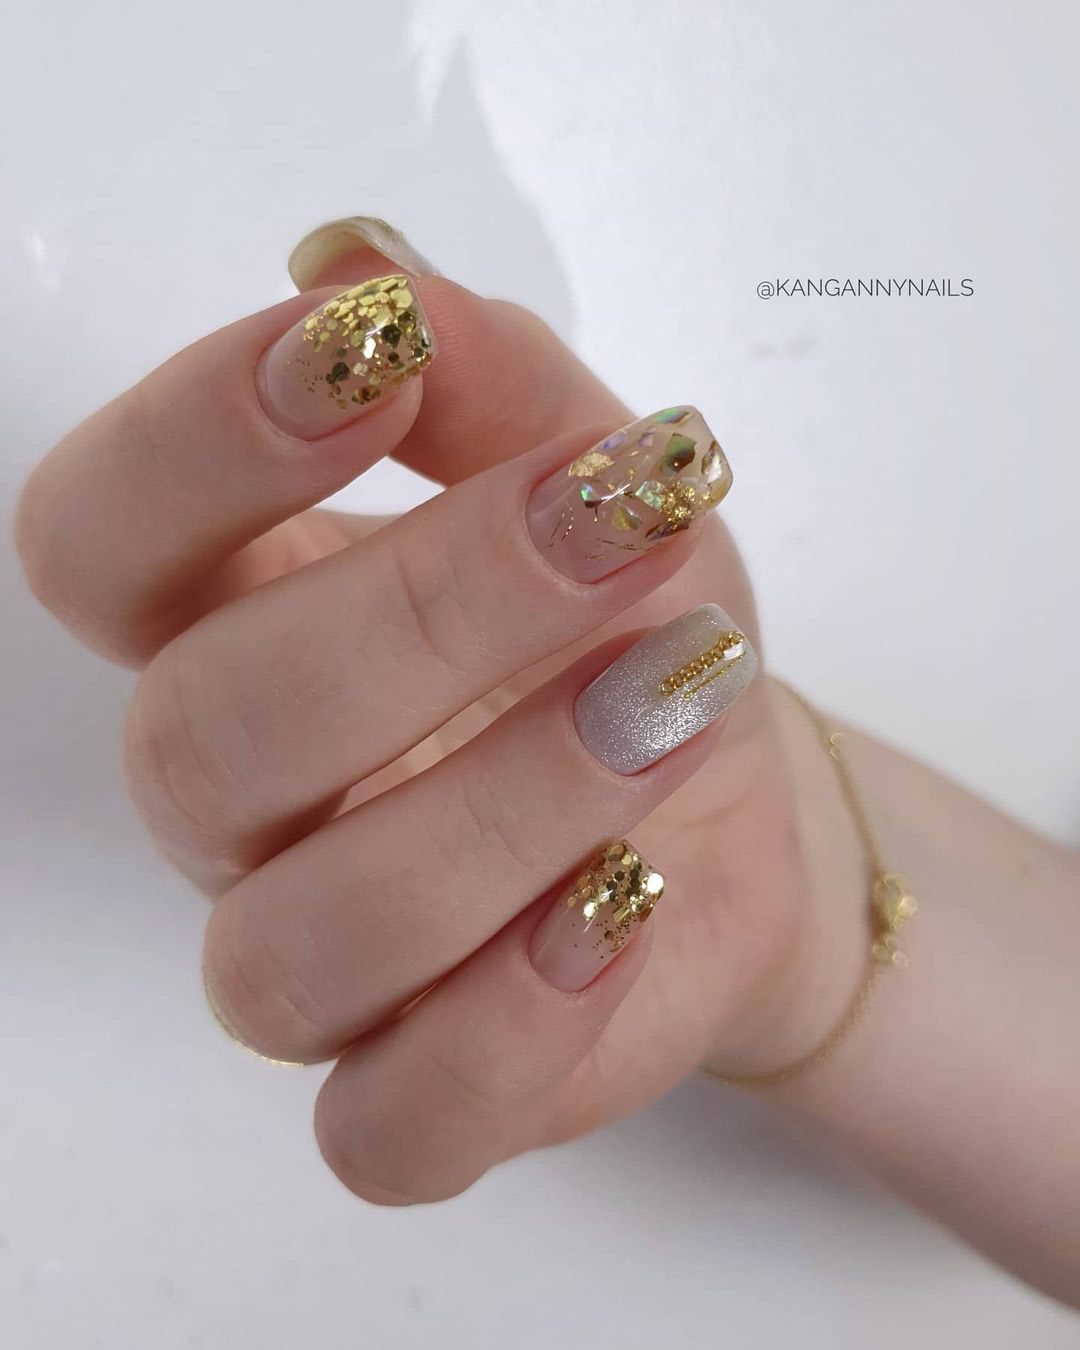 nude wedding nails sparkling gold touch kangannynails